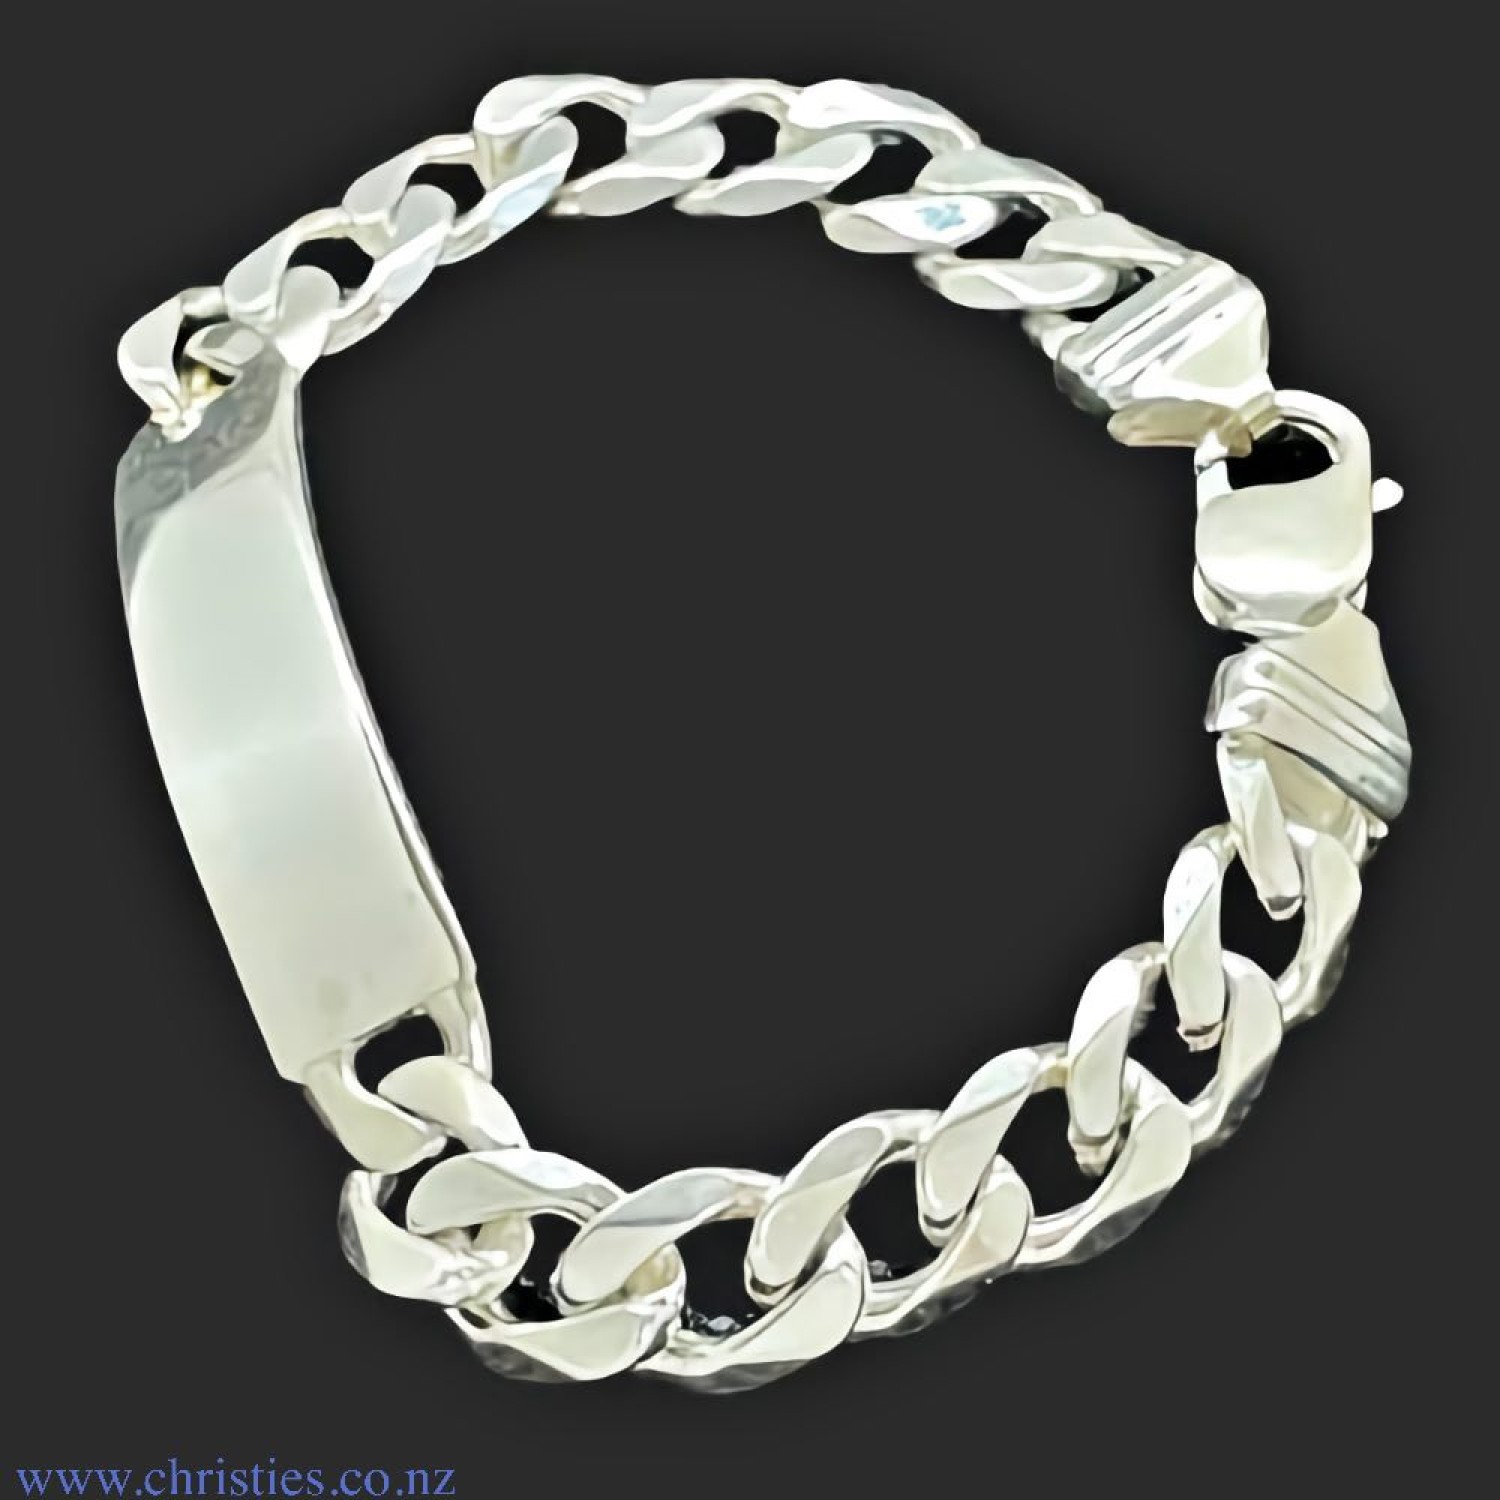 IDCD250H6C20 Sterling Silver ID Curb Link Bracelet. Heavy weight  Identification bracelet crafted in 925 sterling silver  Afterpay - Split your purchase into 4 instalments - Pay for your purchase over 4 instalments, due every two weeks. You’ll pay @christ